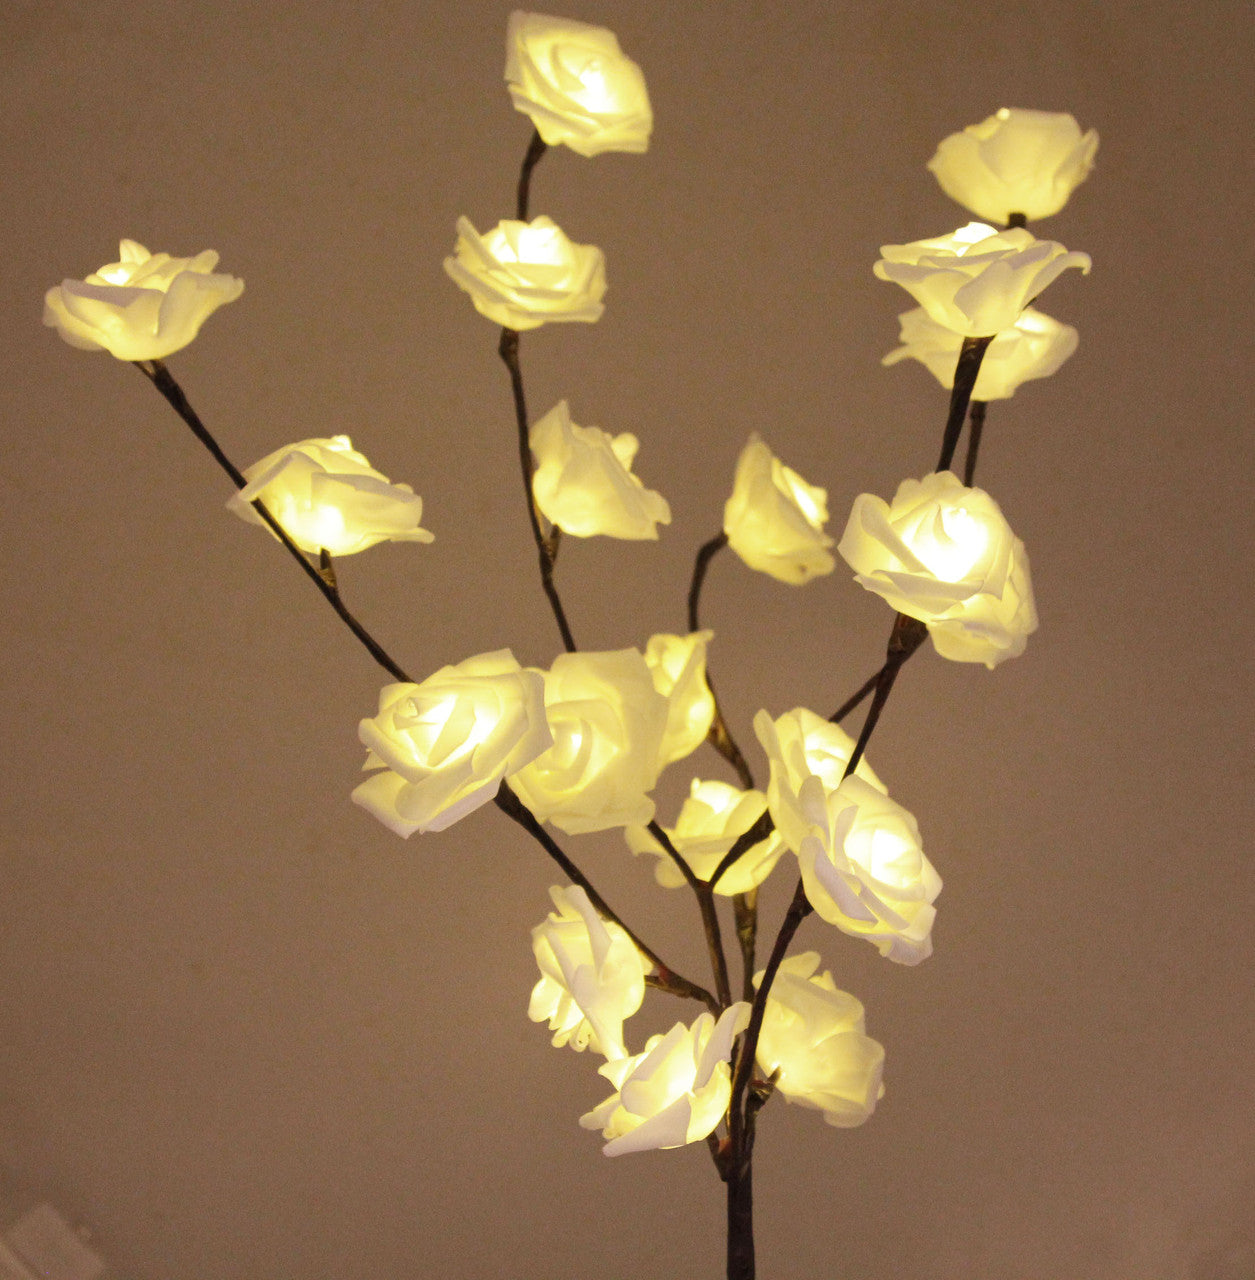 1 Set of 50cm H 20 LED White Rose Tree Branch Stem Fairy Light Wedding Event Party Function Table Vase Centrepiece Decoration - SILBERSHELL